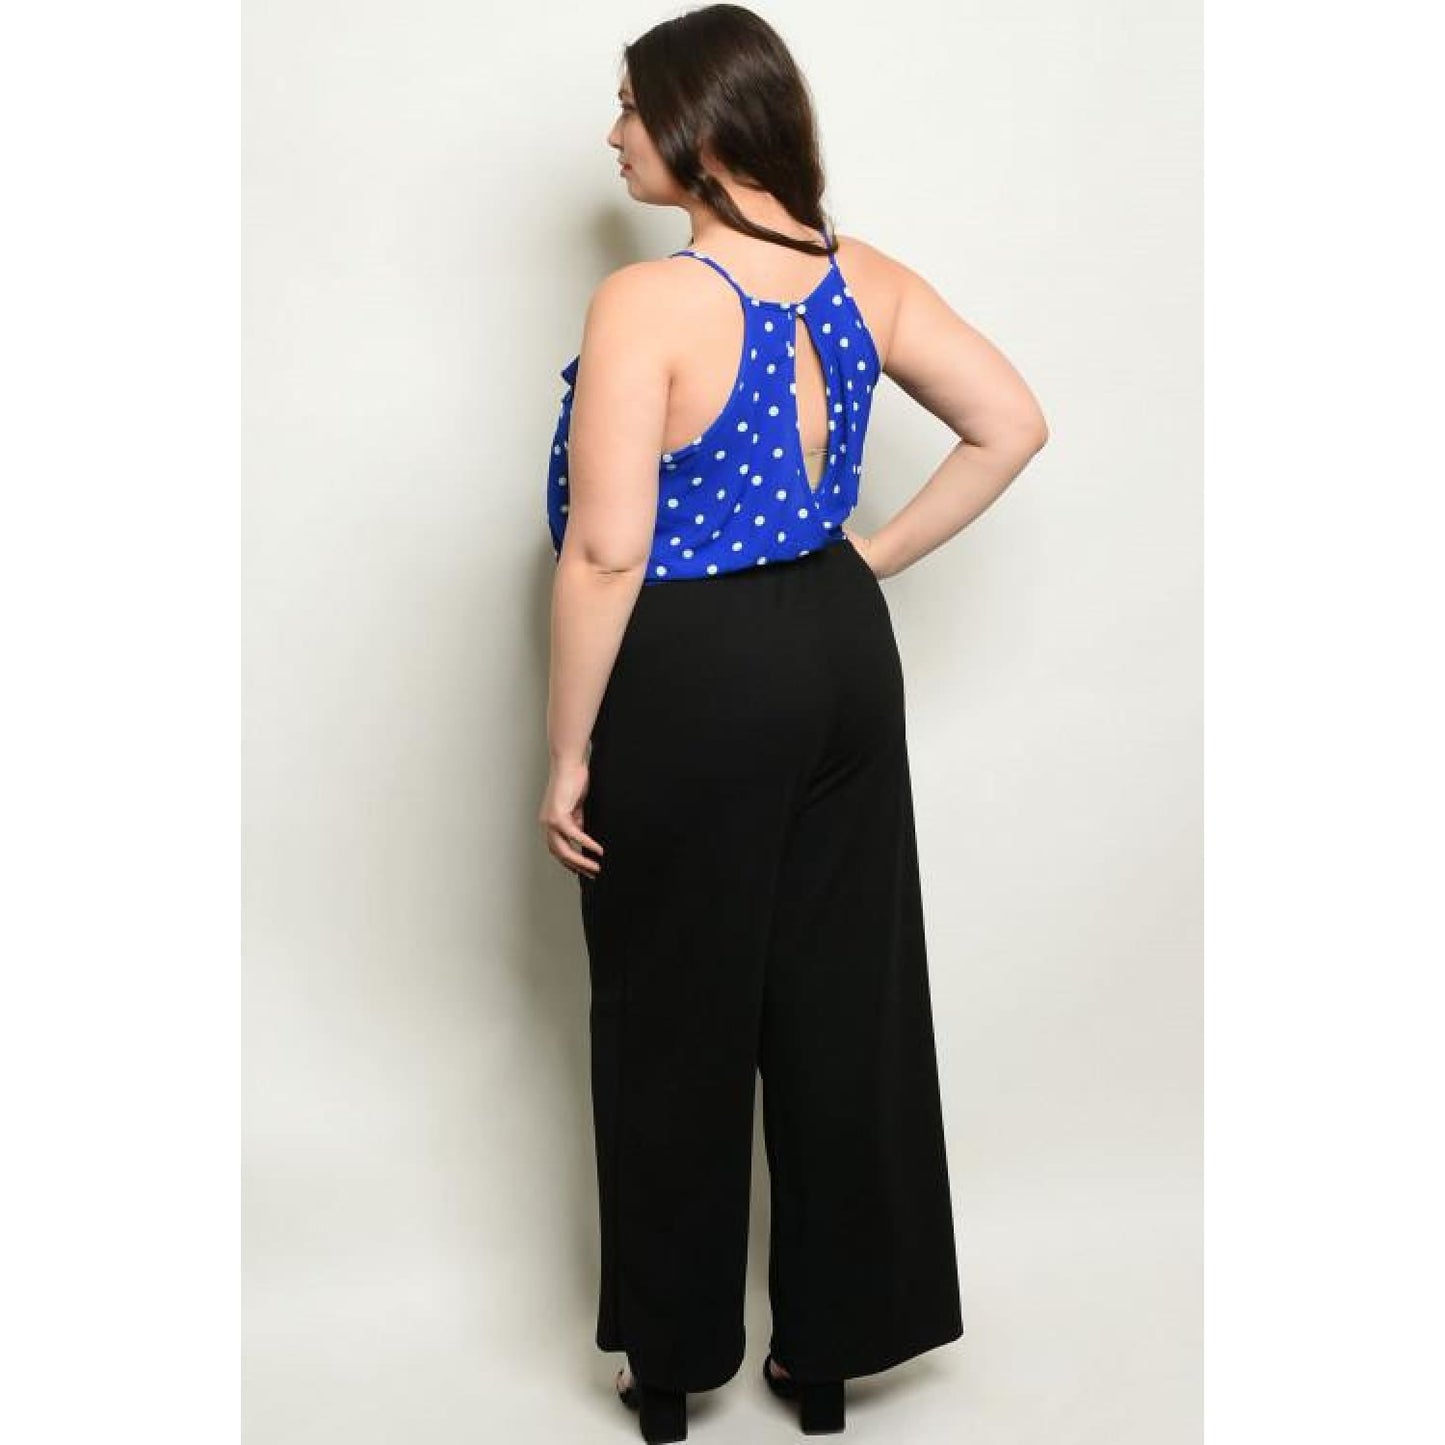 Royal Polka Dot Plus Jumpsuit - Best YOU by HTS